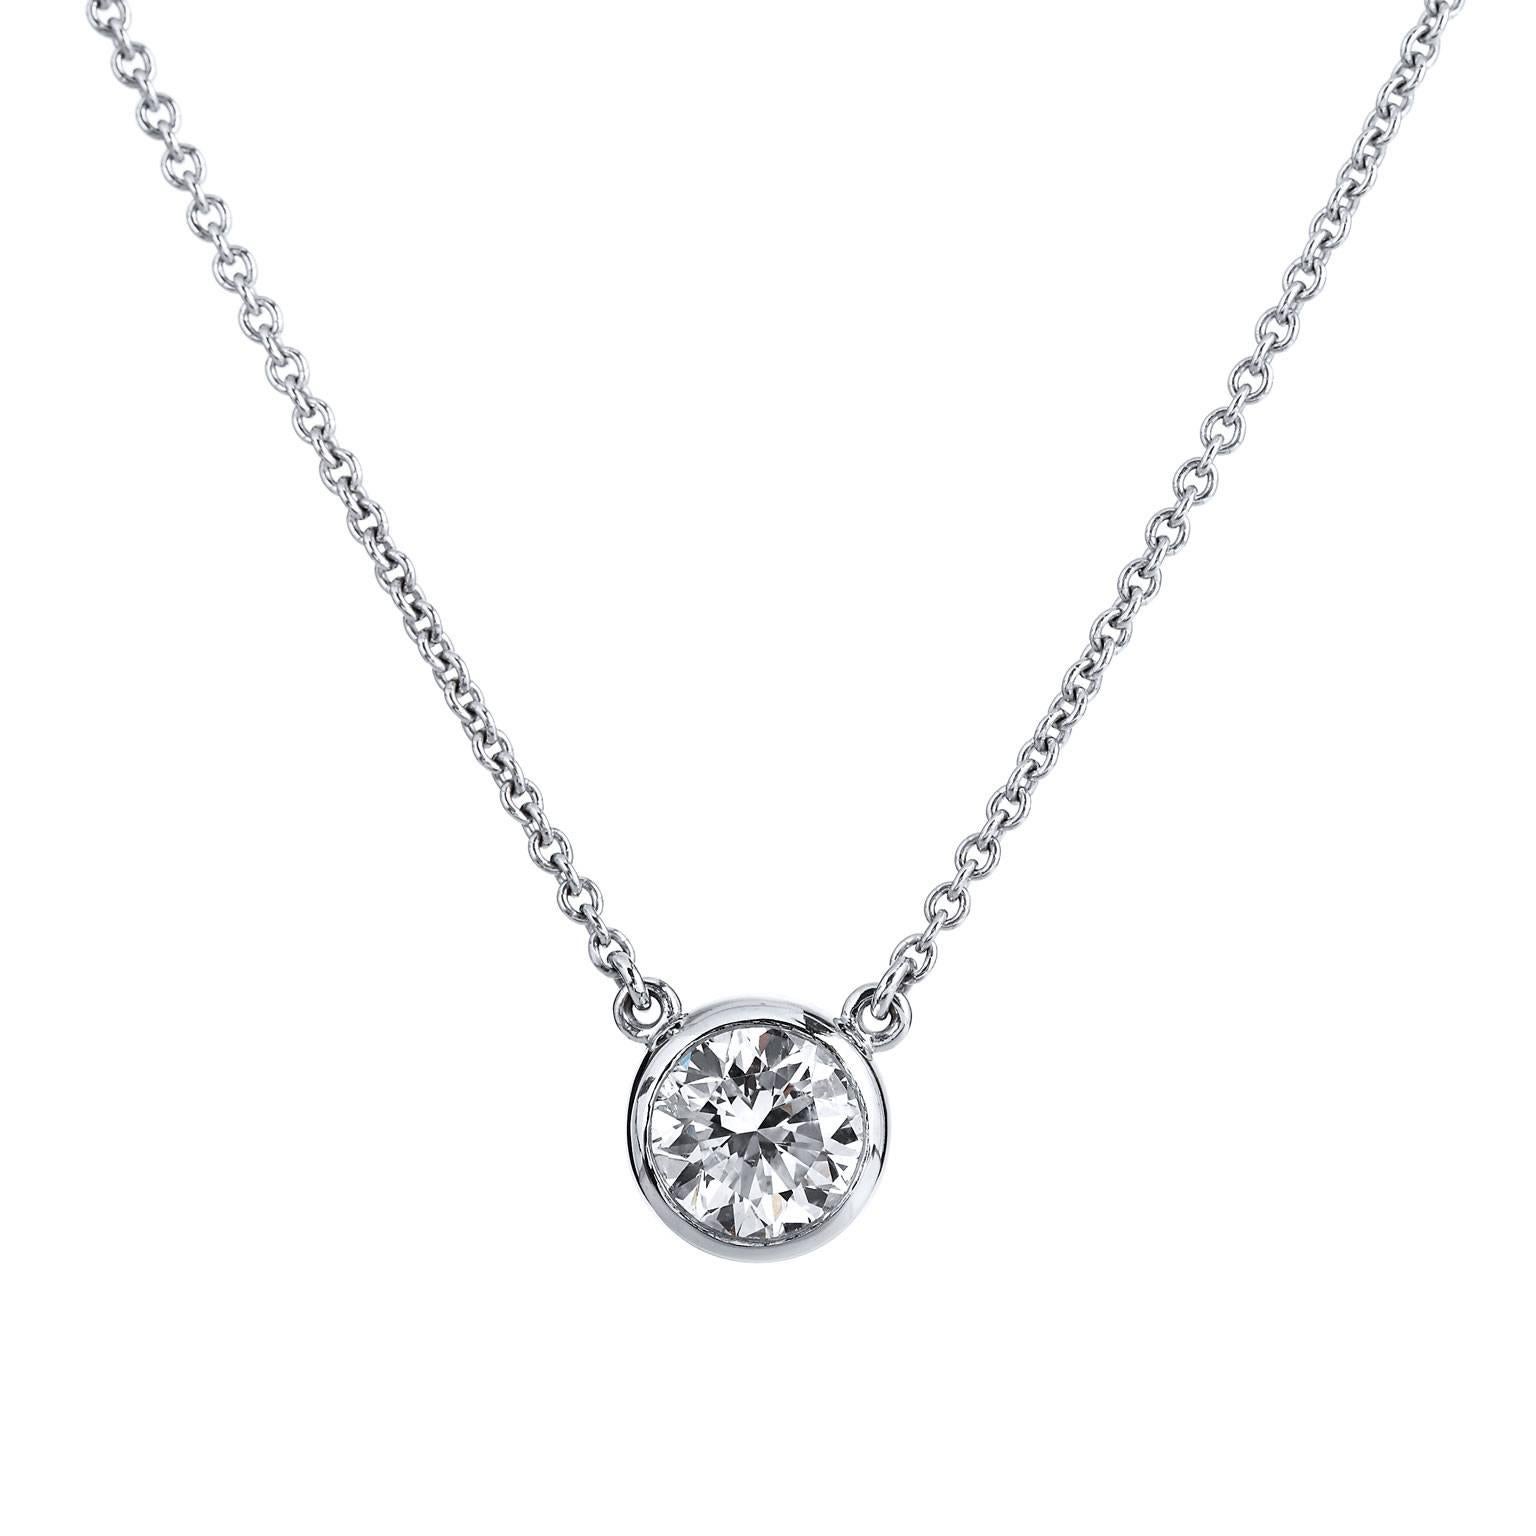 This H and H 18 karat white gold pendant features a lovely 1.01 carat round brilliant cut diamond at center bezel set (F/SI2; GIA#5171155033). Simplicity and refinement reign supreme in this piece.